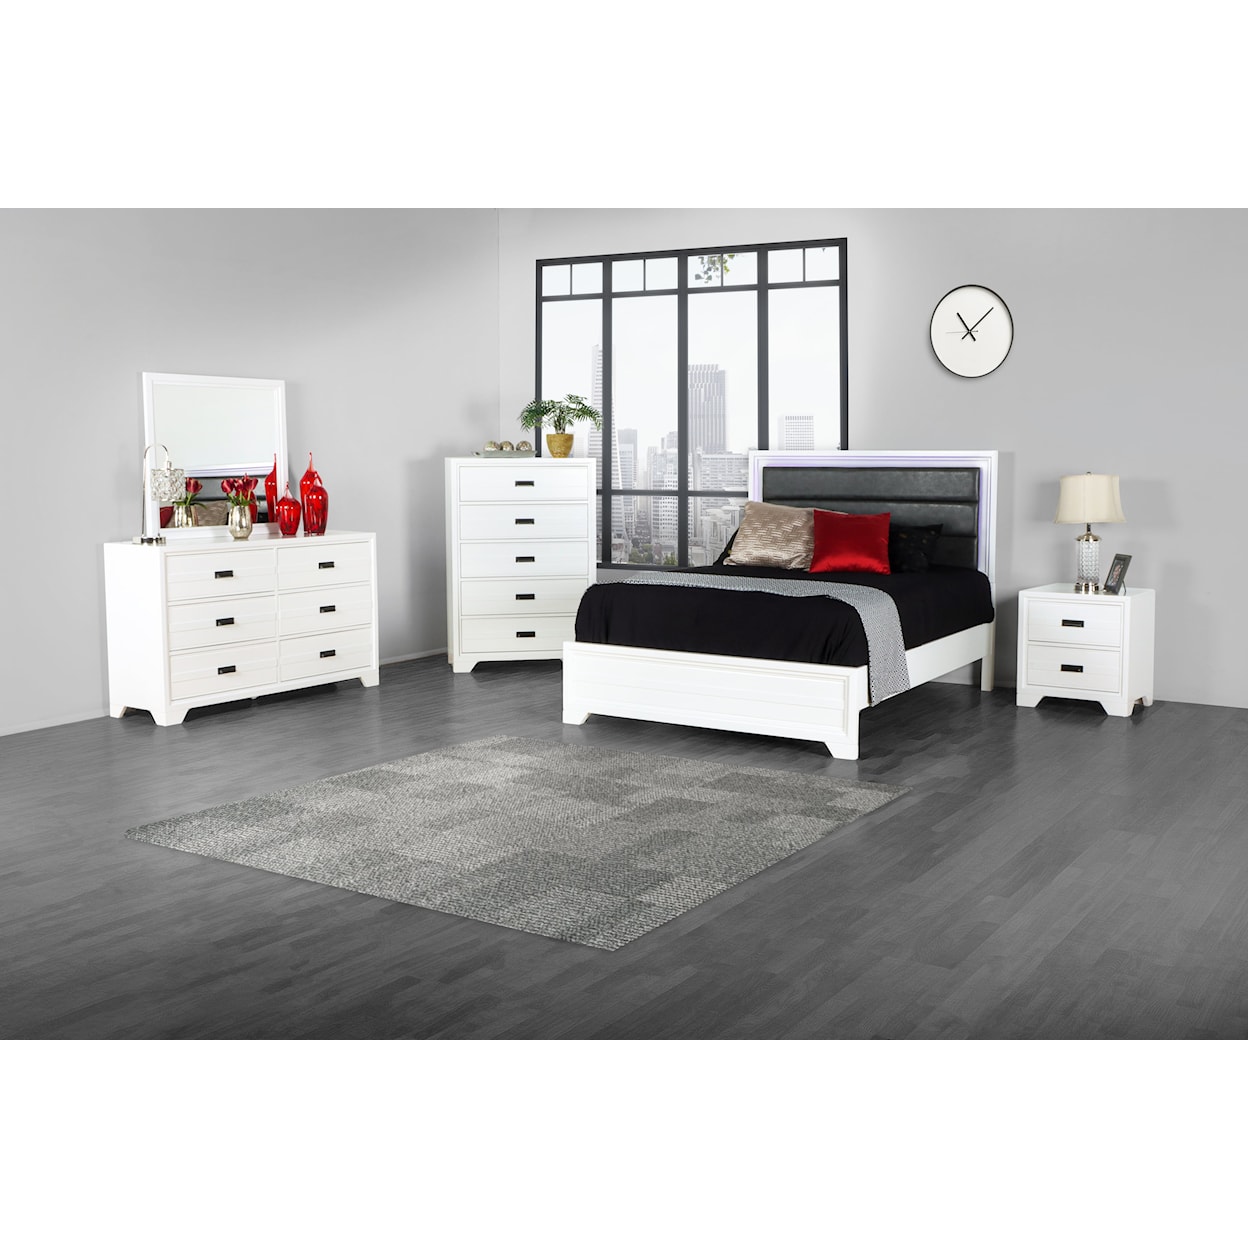 New Classic Furniture Halo Queen Bedroom Group